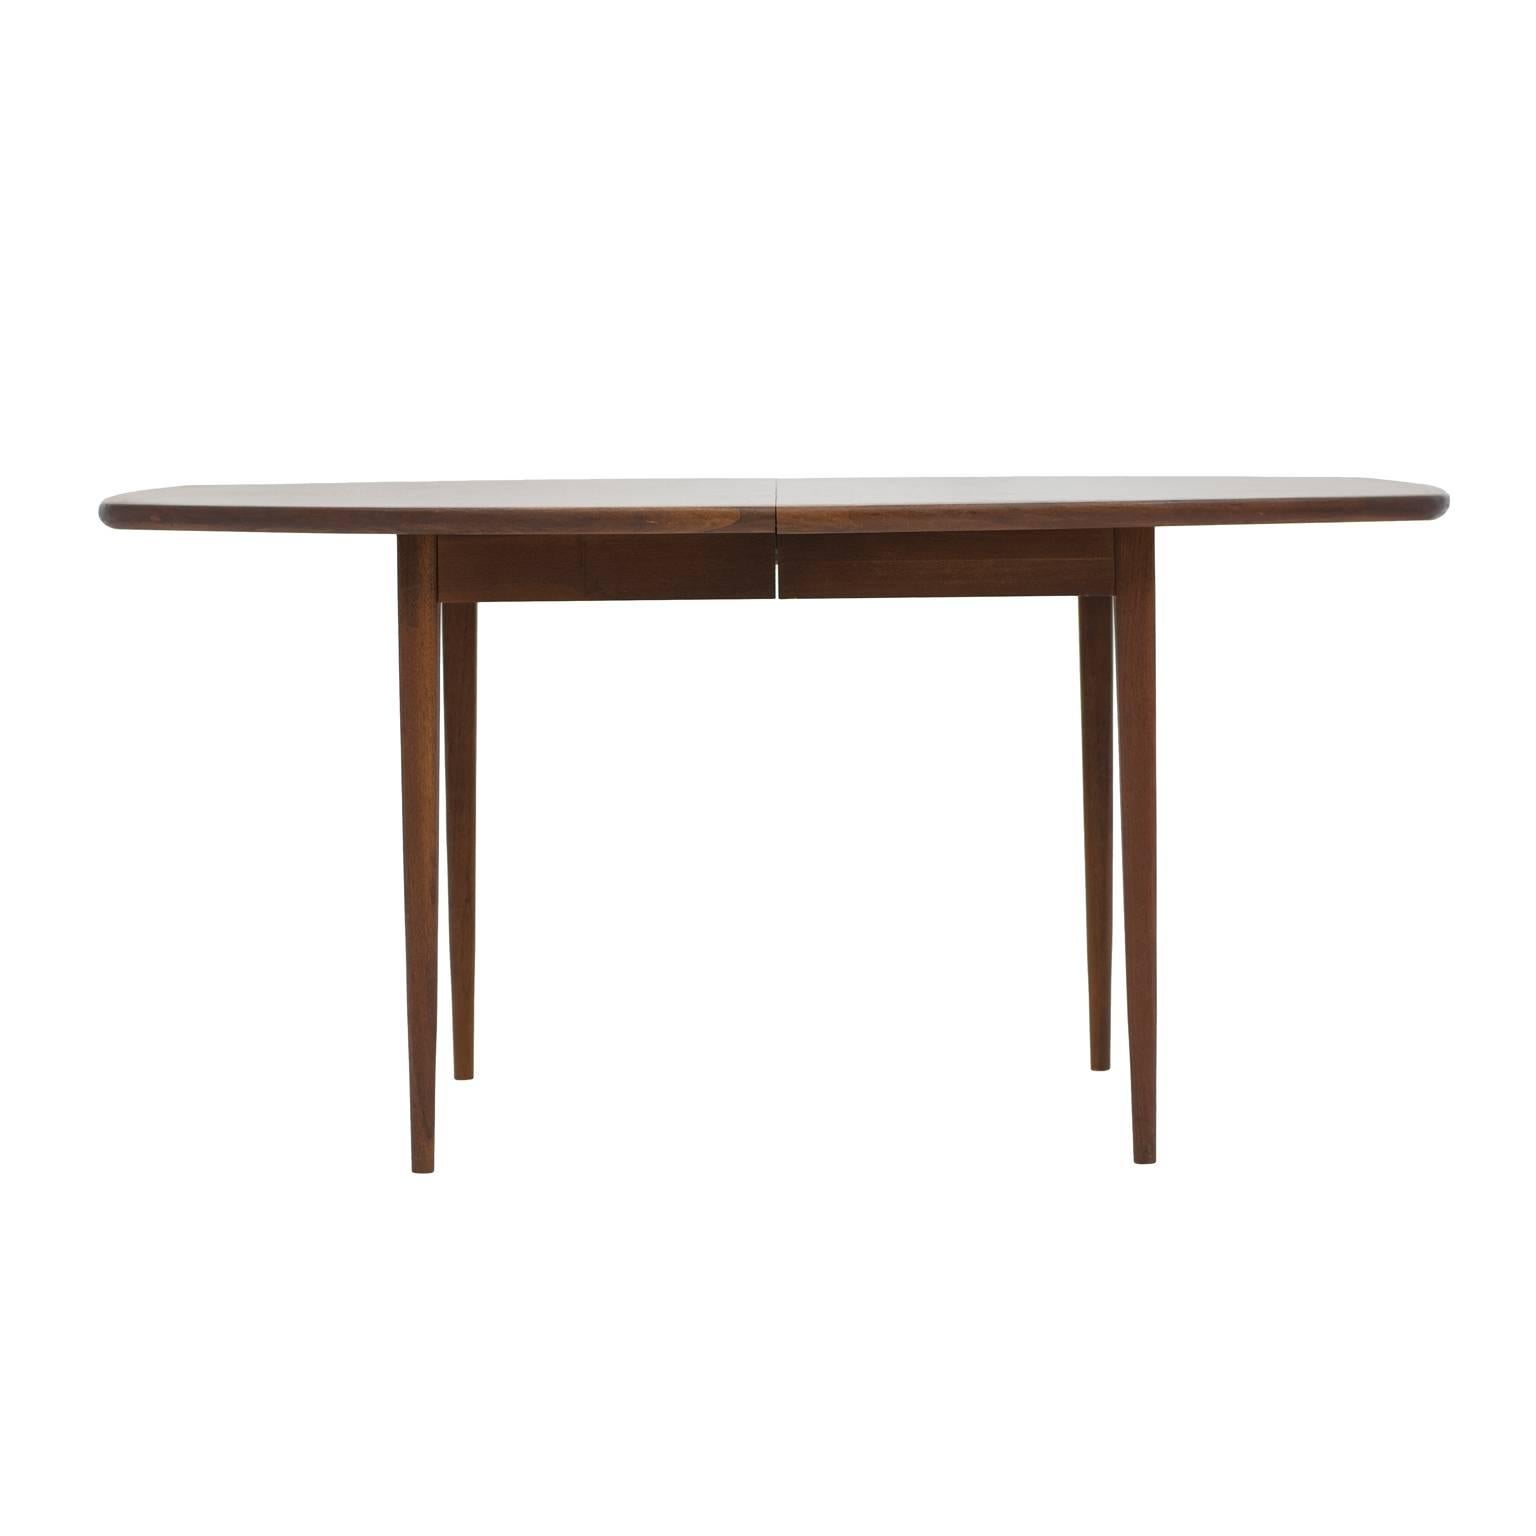 Modernist, elegant and streamlined Mid-Century dining table by Dillingham in solid walnut. The table design is attributed to Milo Baughman and features tapered legs and a surfboard style top. This dining table has two leaves, each 18” wide. With one